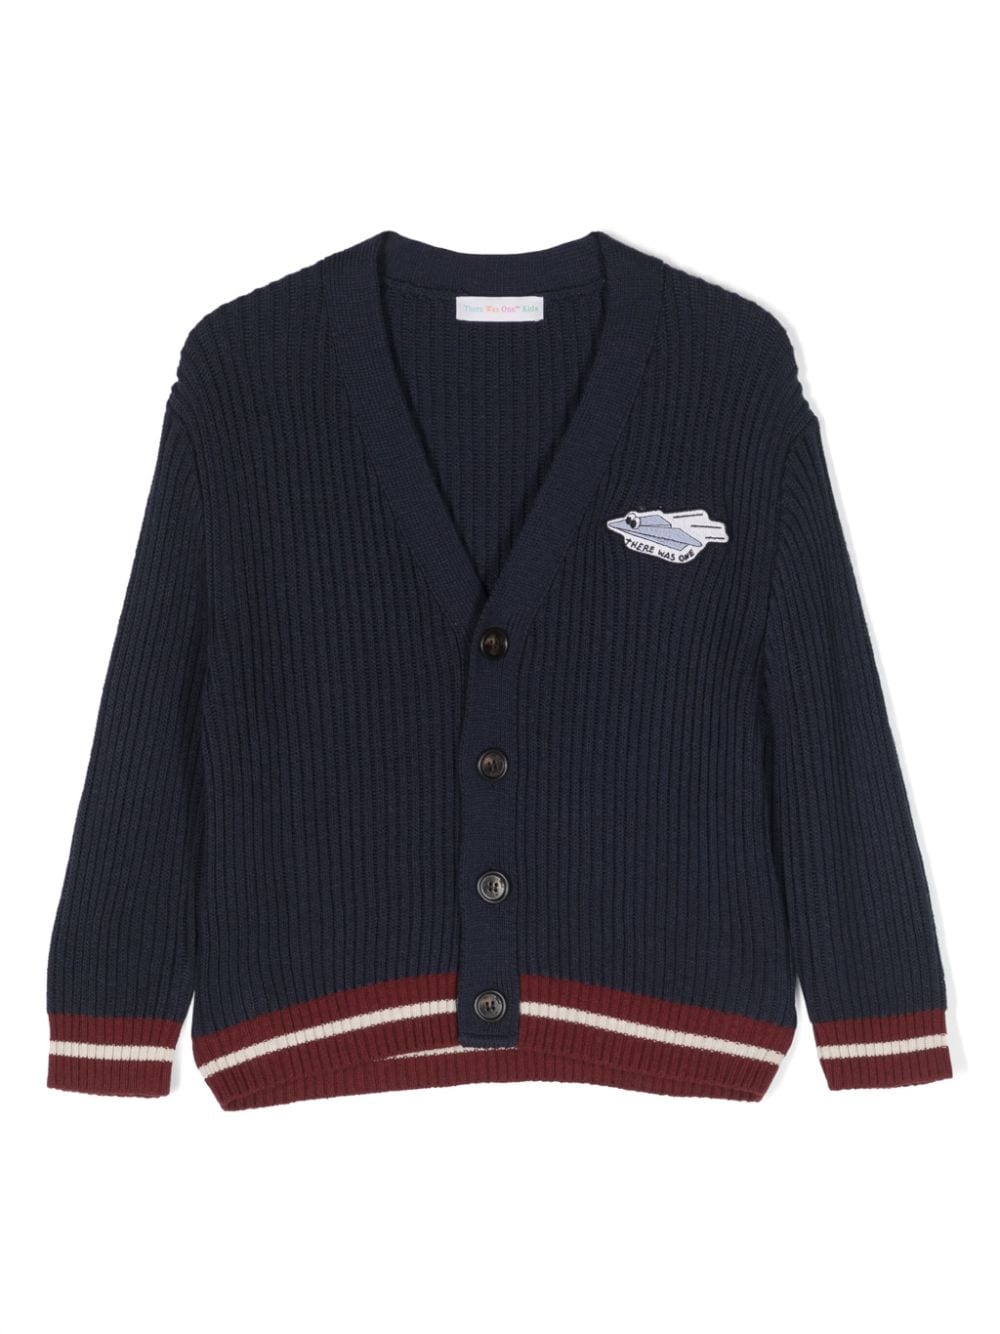 Image 1 of There Was One Kids Cardigan con scollo a V